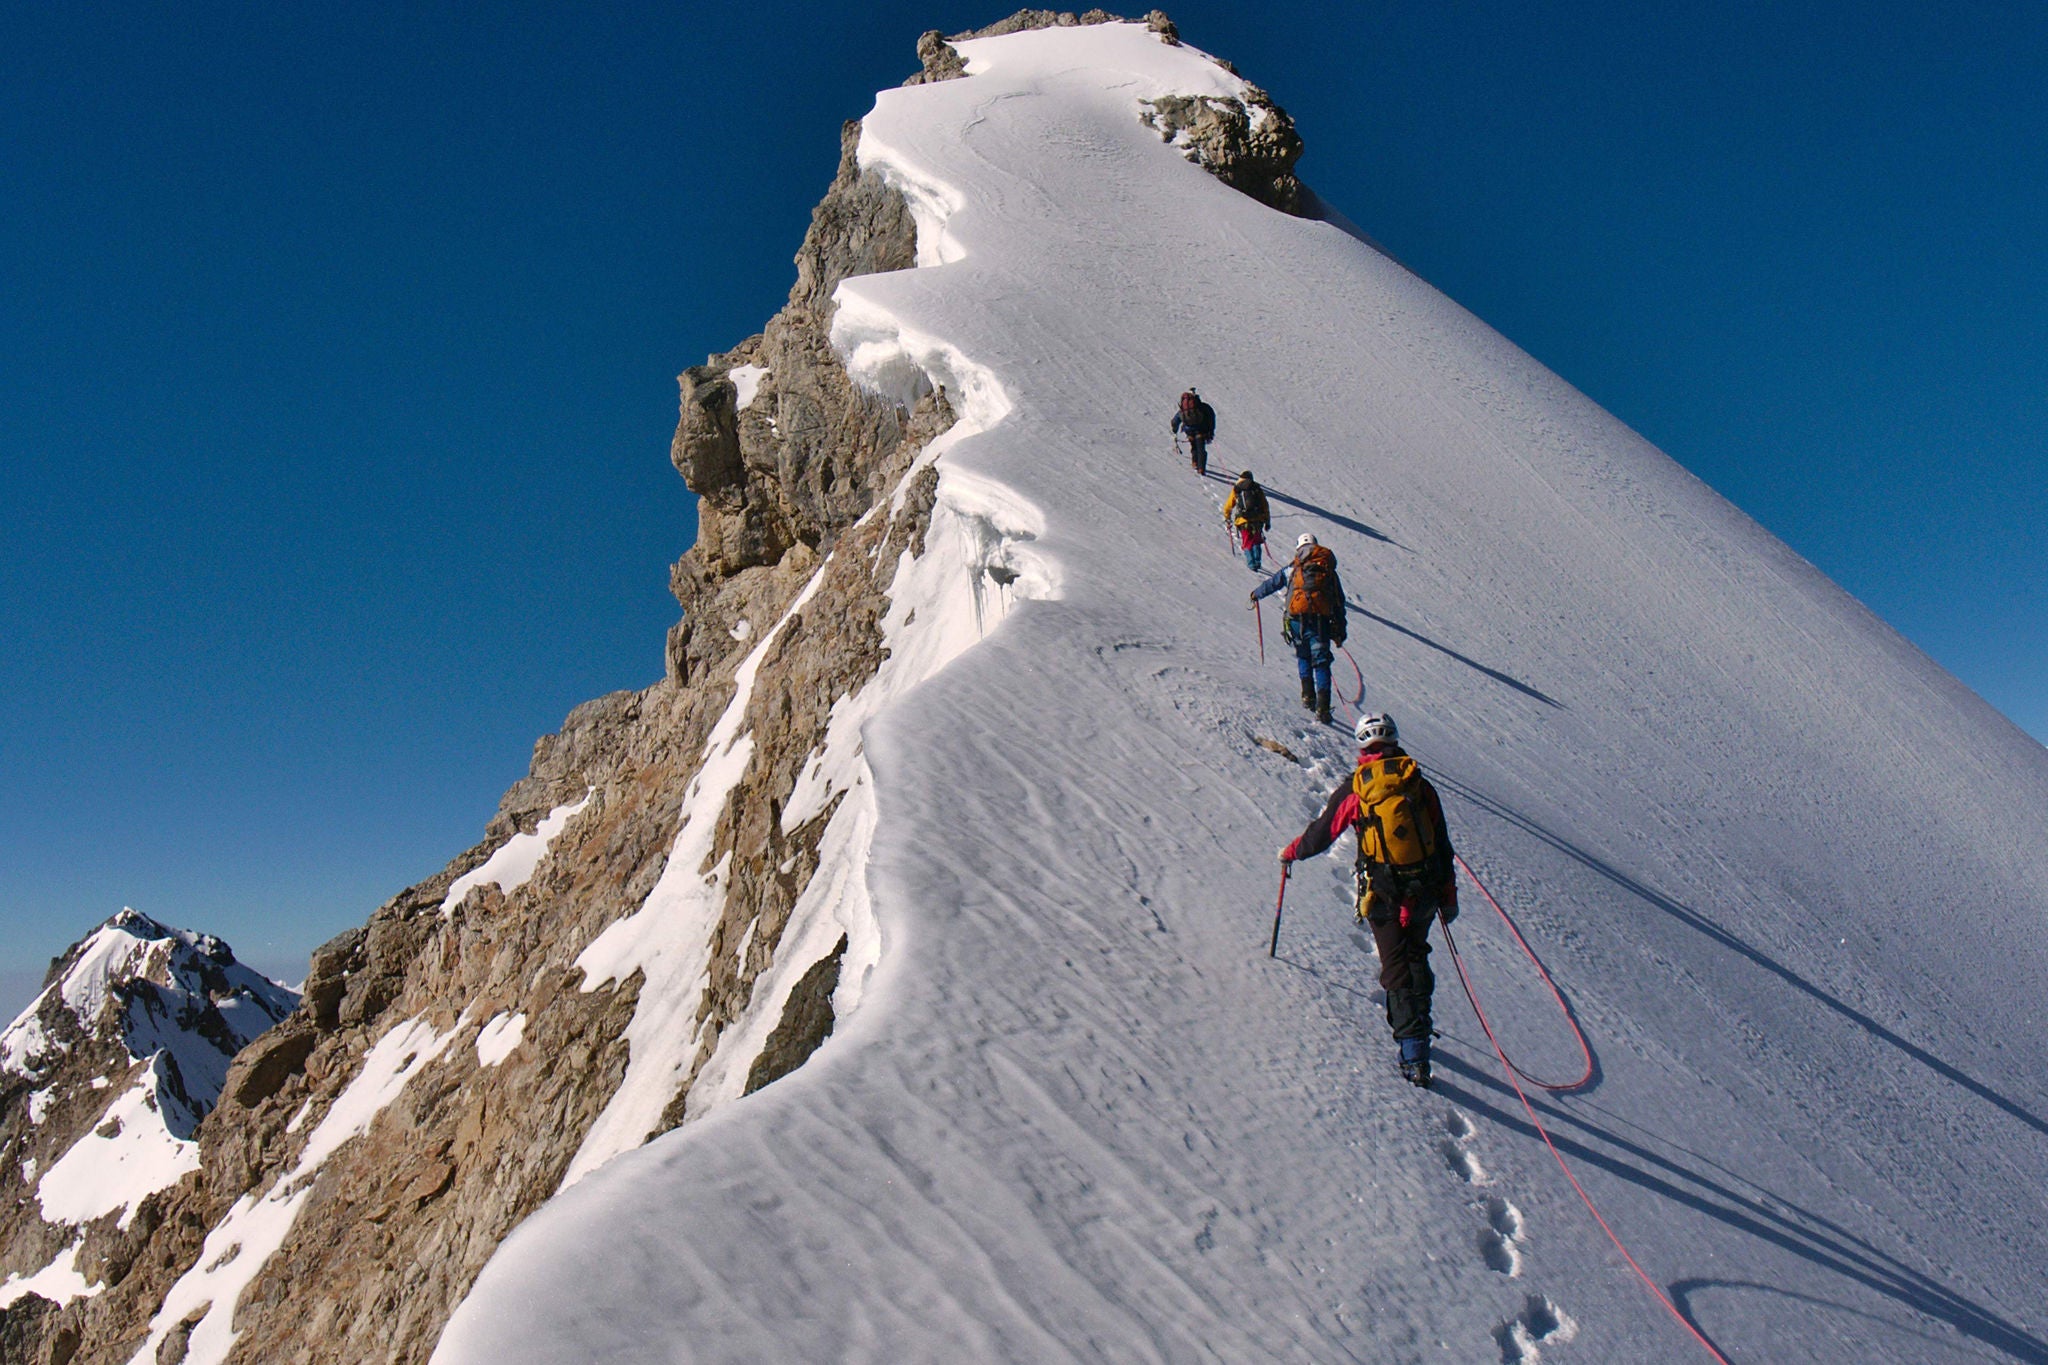 A Team of Mountaineers Climbing a mountain with safety ropes working as a team